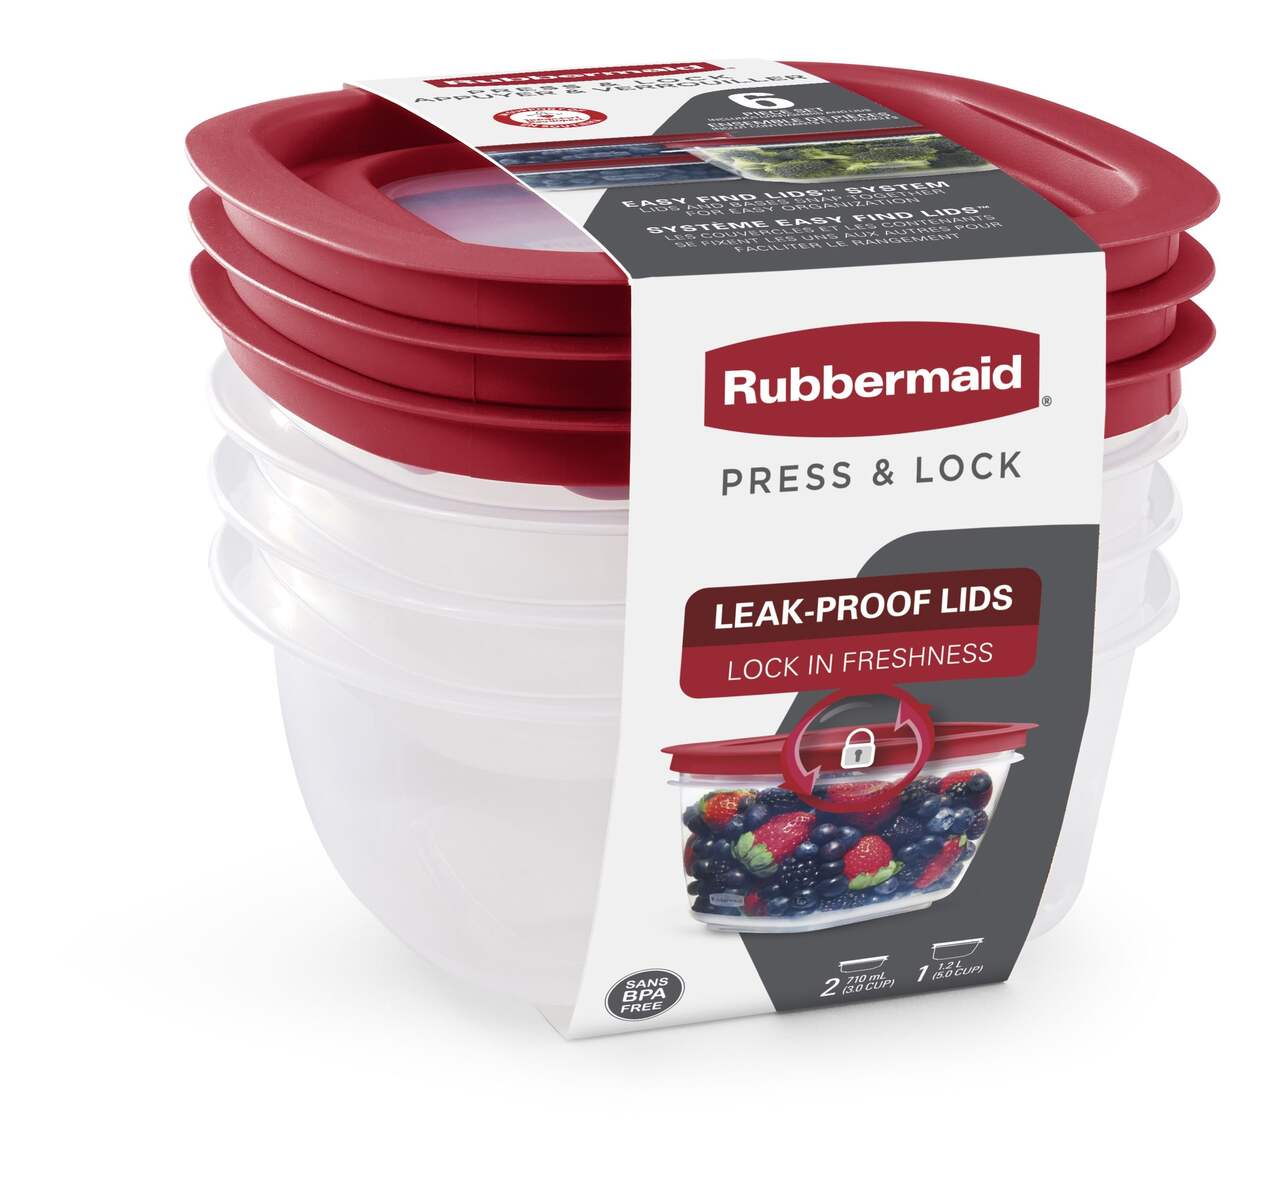 https://media-www.canadiantire.ca/product/living/kitchen/food-storage/1429333/rubbermaid-pressnlock-6-piece-set-42e76127-e588-4acc-aa5e-eec9a56dc813-jpgrendition.jpg?imdensity=1&imwidth=640&impolicy=mZoom